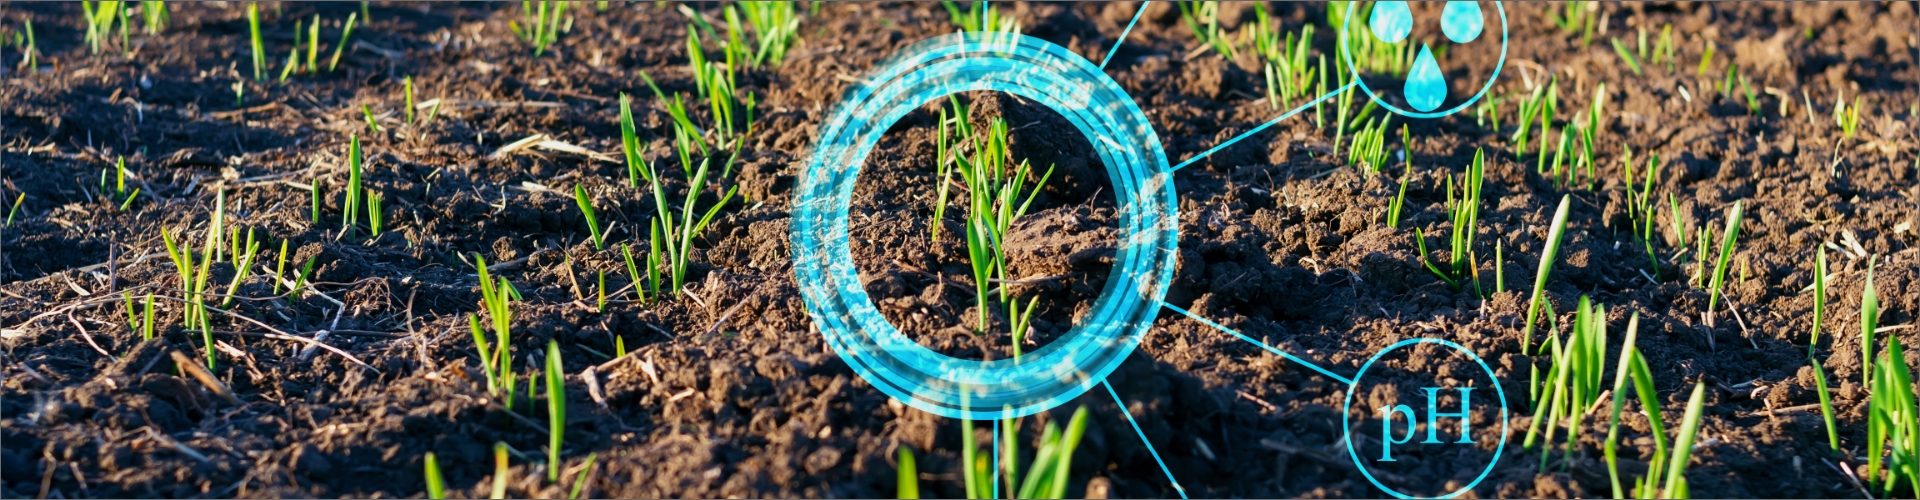 Hitachi Vantara and Golden Grove Nursery Harness Data-Driven Analytics for Smart Farming and More Sustainable Water Management 